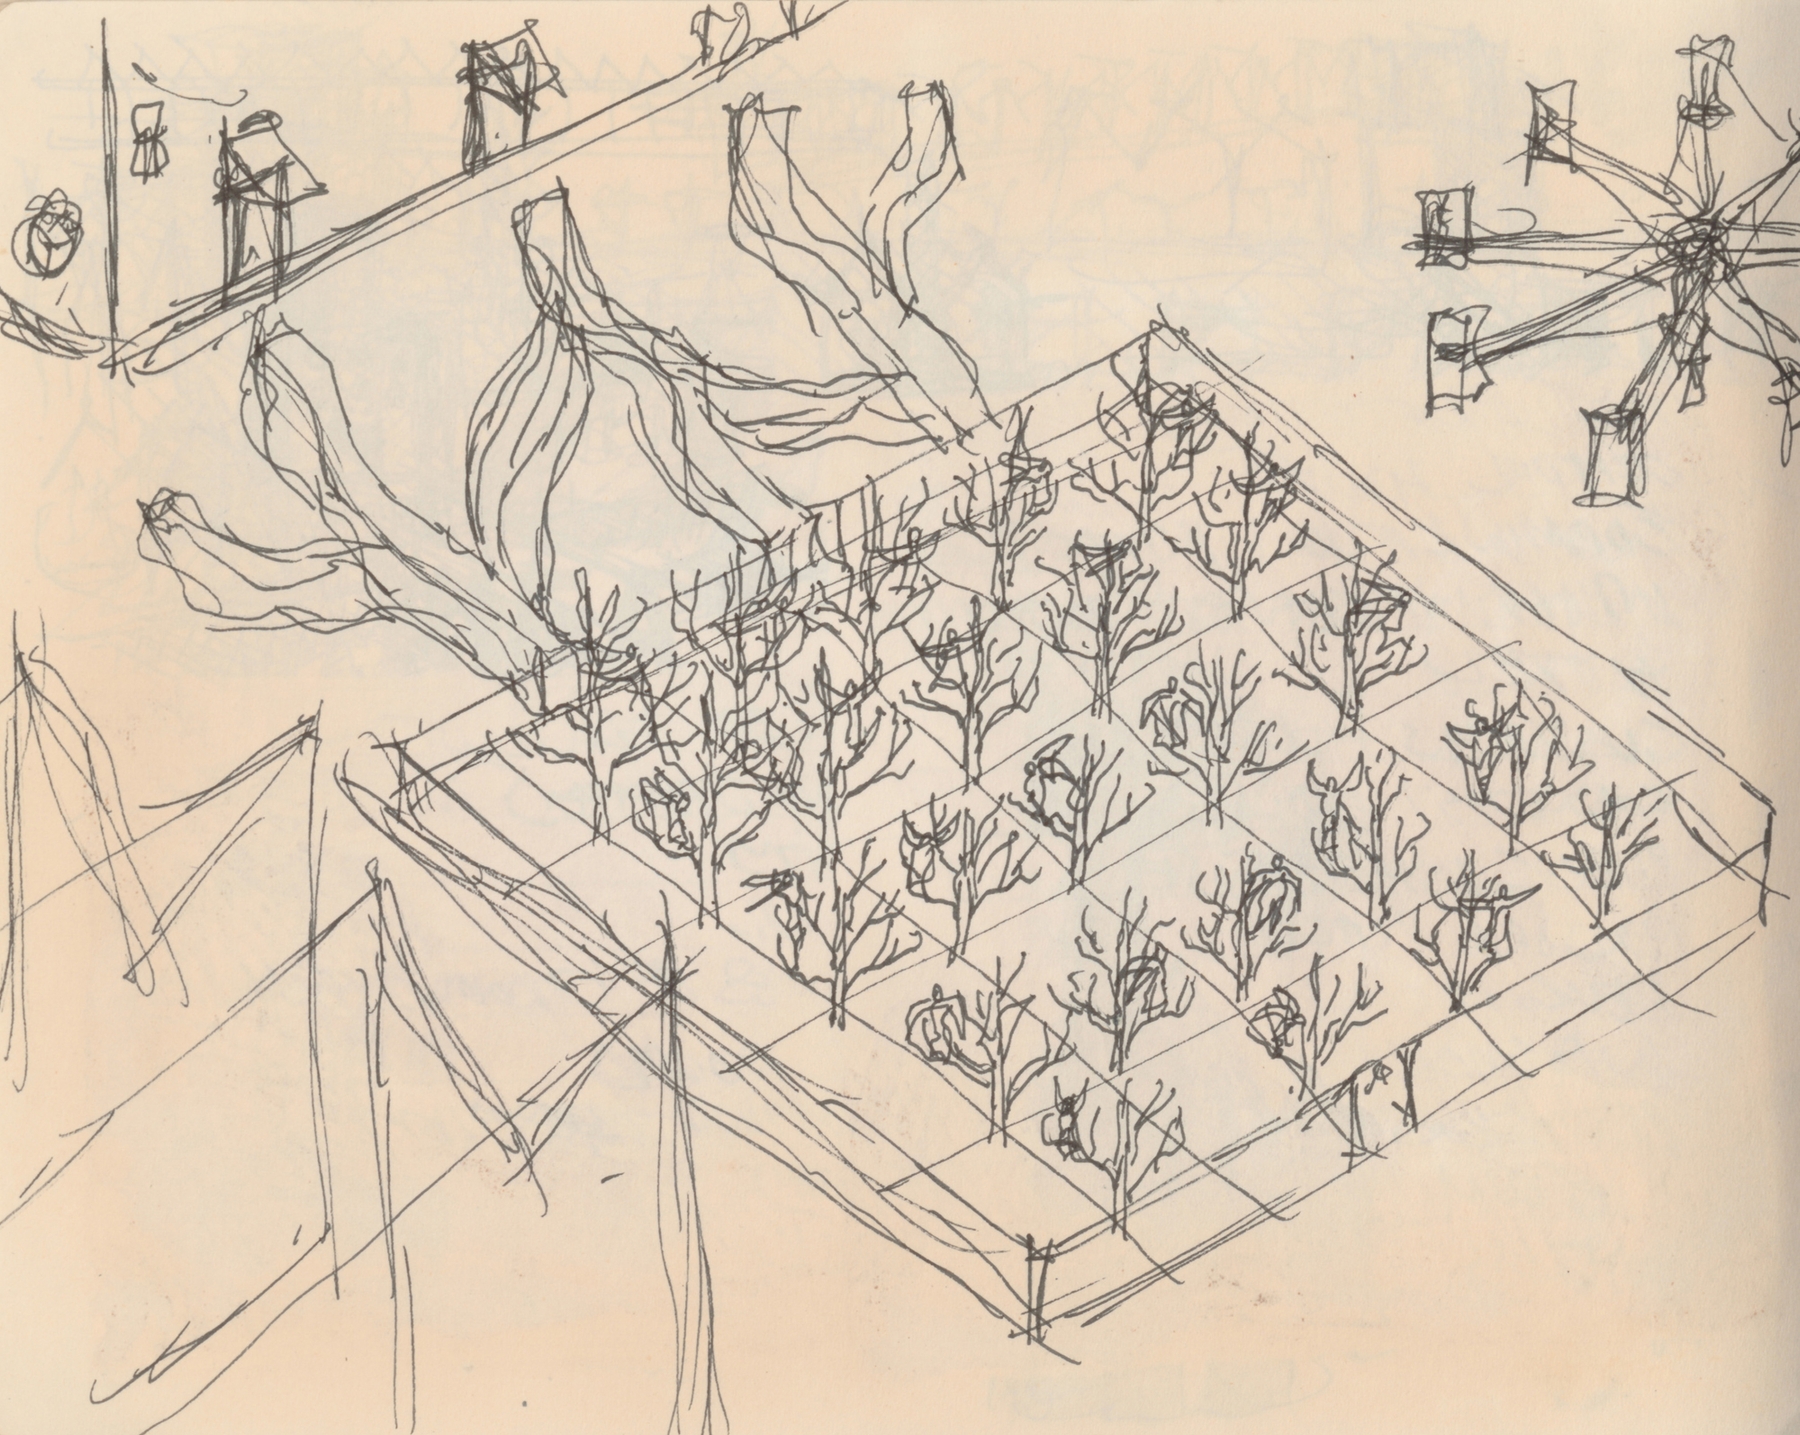 John Hejduk, Sketches and clippings 2